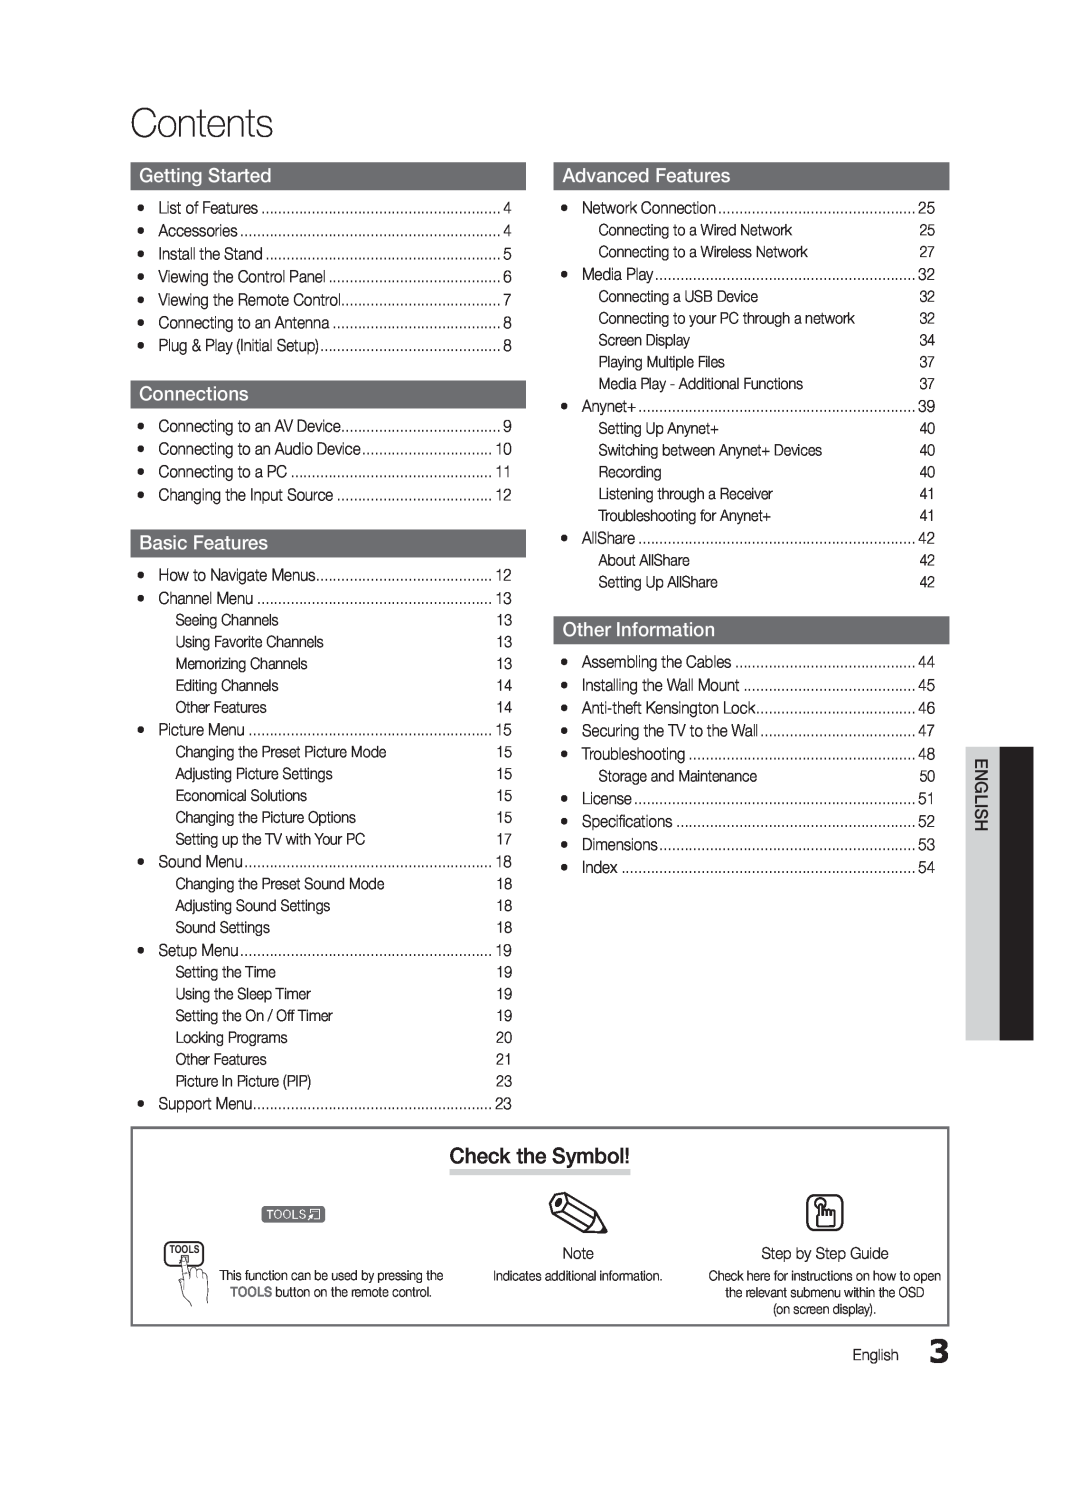 Samsung UC5000-ZC user manual Contents, Check the Symbol, Getting Started, Connections, Advanced Features, Basic Features 